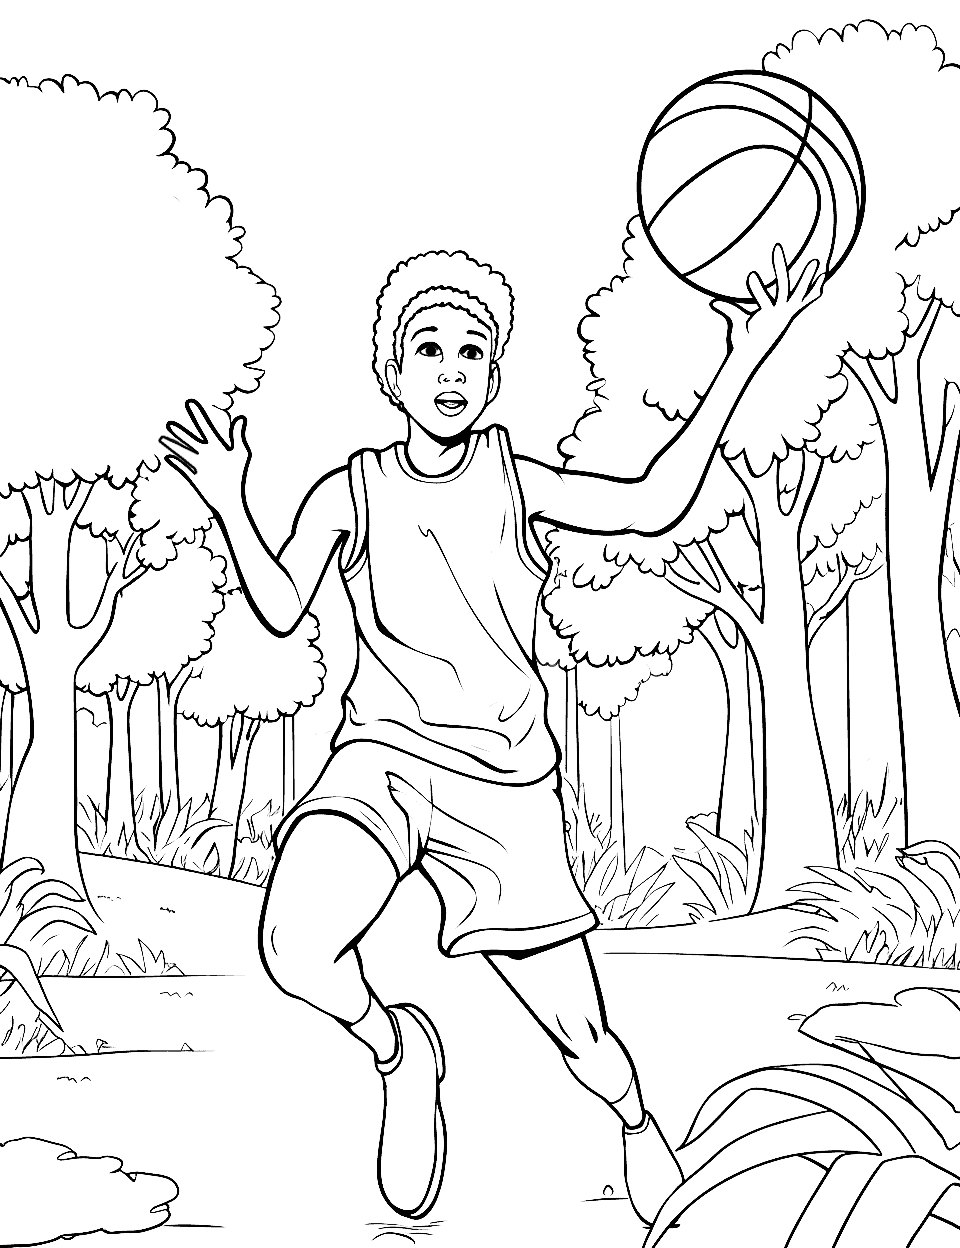 Rainforest Pick-up Game Basketball Coloring Page - A kid playing basketball in a clearing in the rainforest.